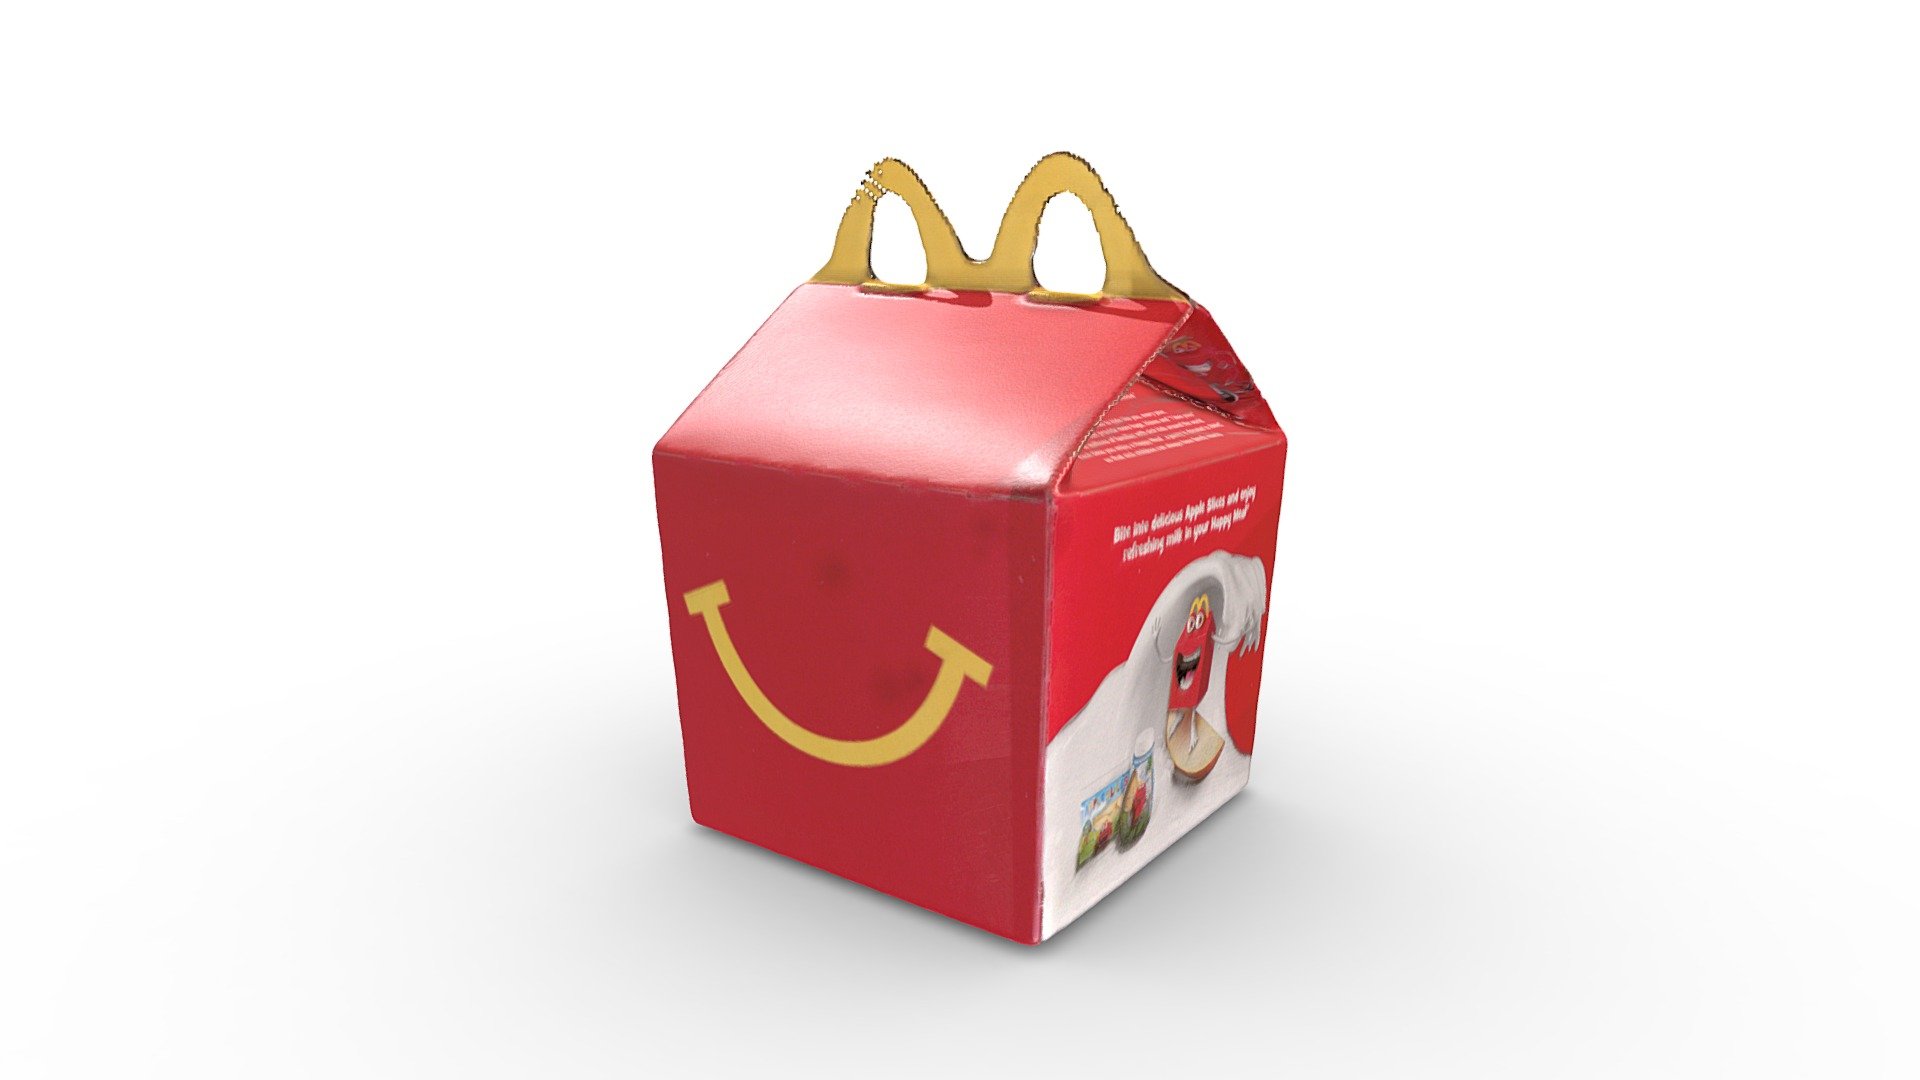 Details about   MIP 2017 McDONALD'S HAPPY MEAL BOX LOGO PROMO 3D HOLOGRAM CUP MADE in USA 